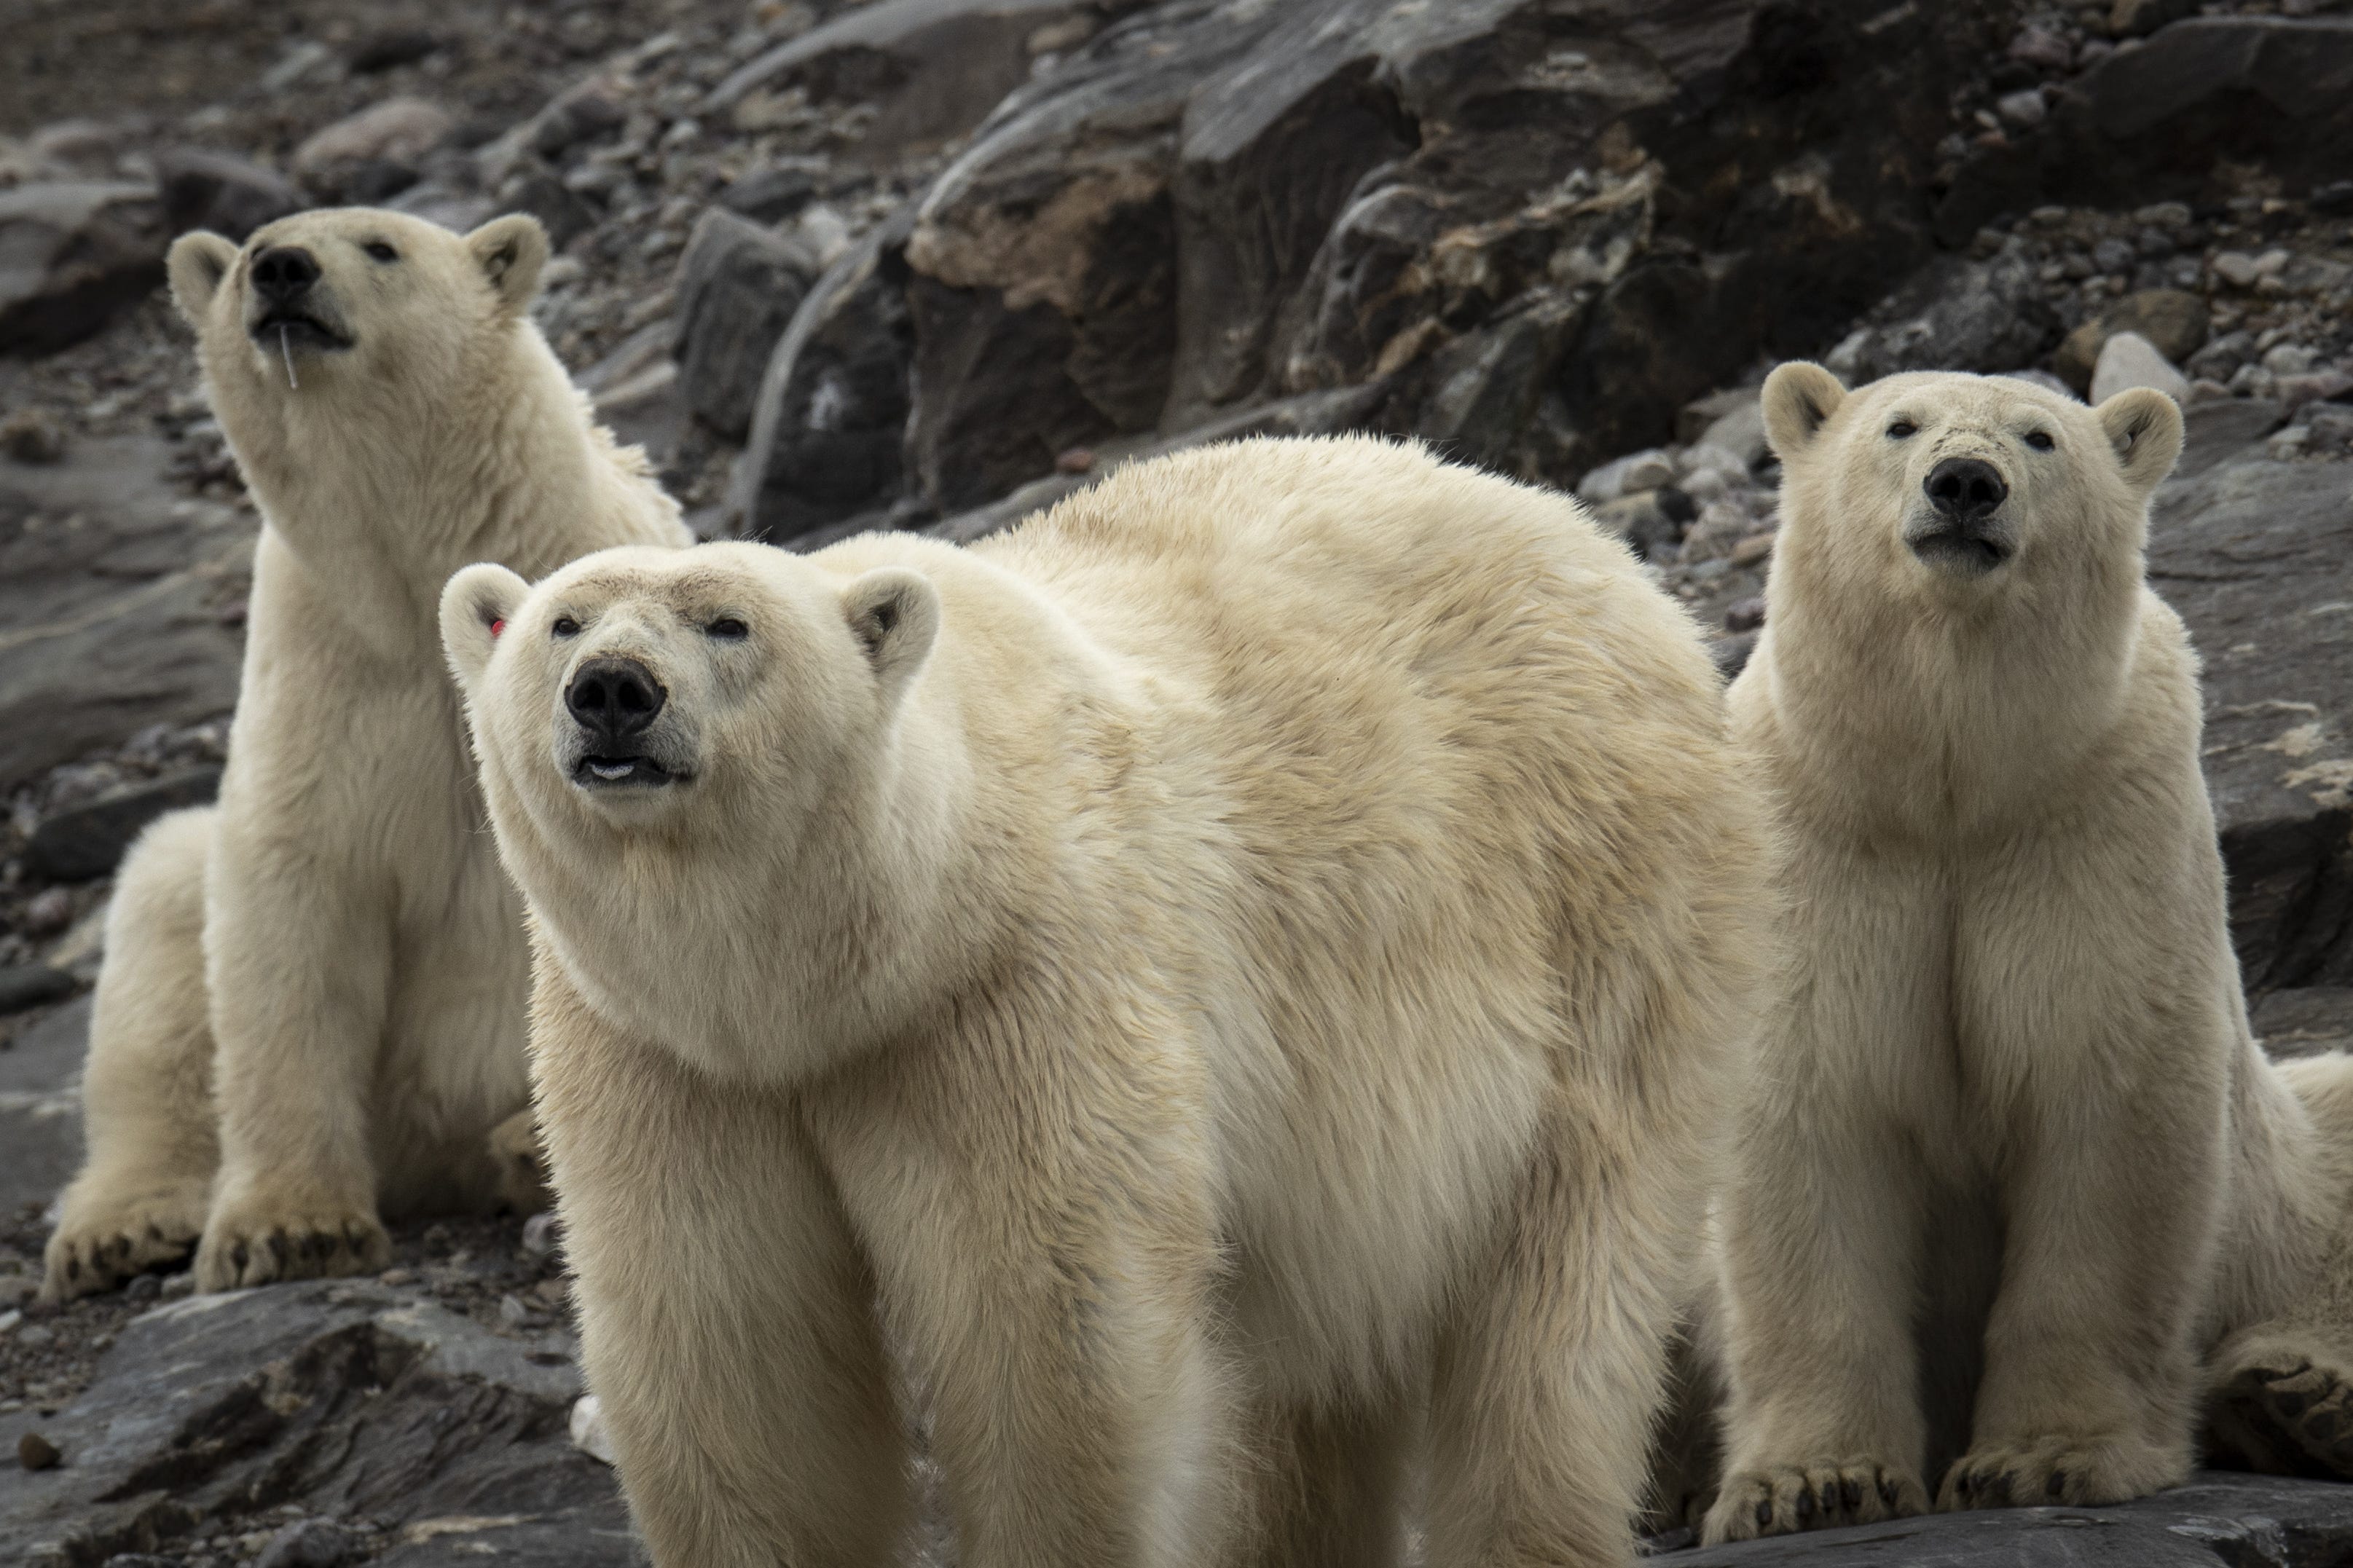 Polar bears are observed during the expedition of the Turkish Scientific Research team near Svalbard Islands, in the Arctic Ocean in Norway on July 23, 2022.